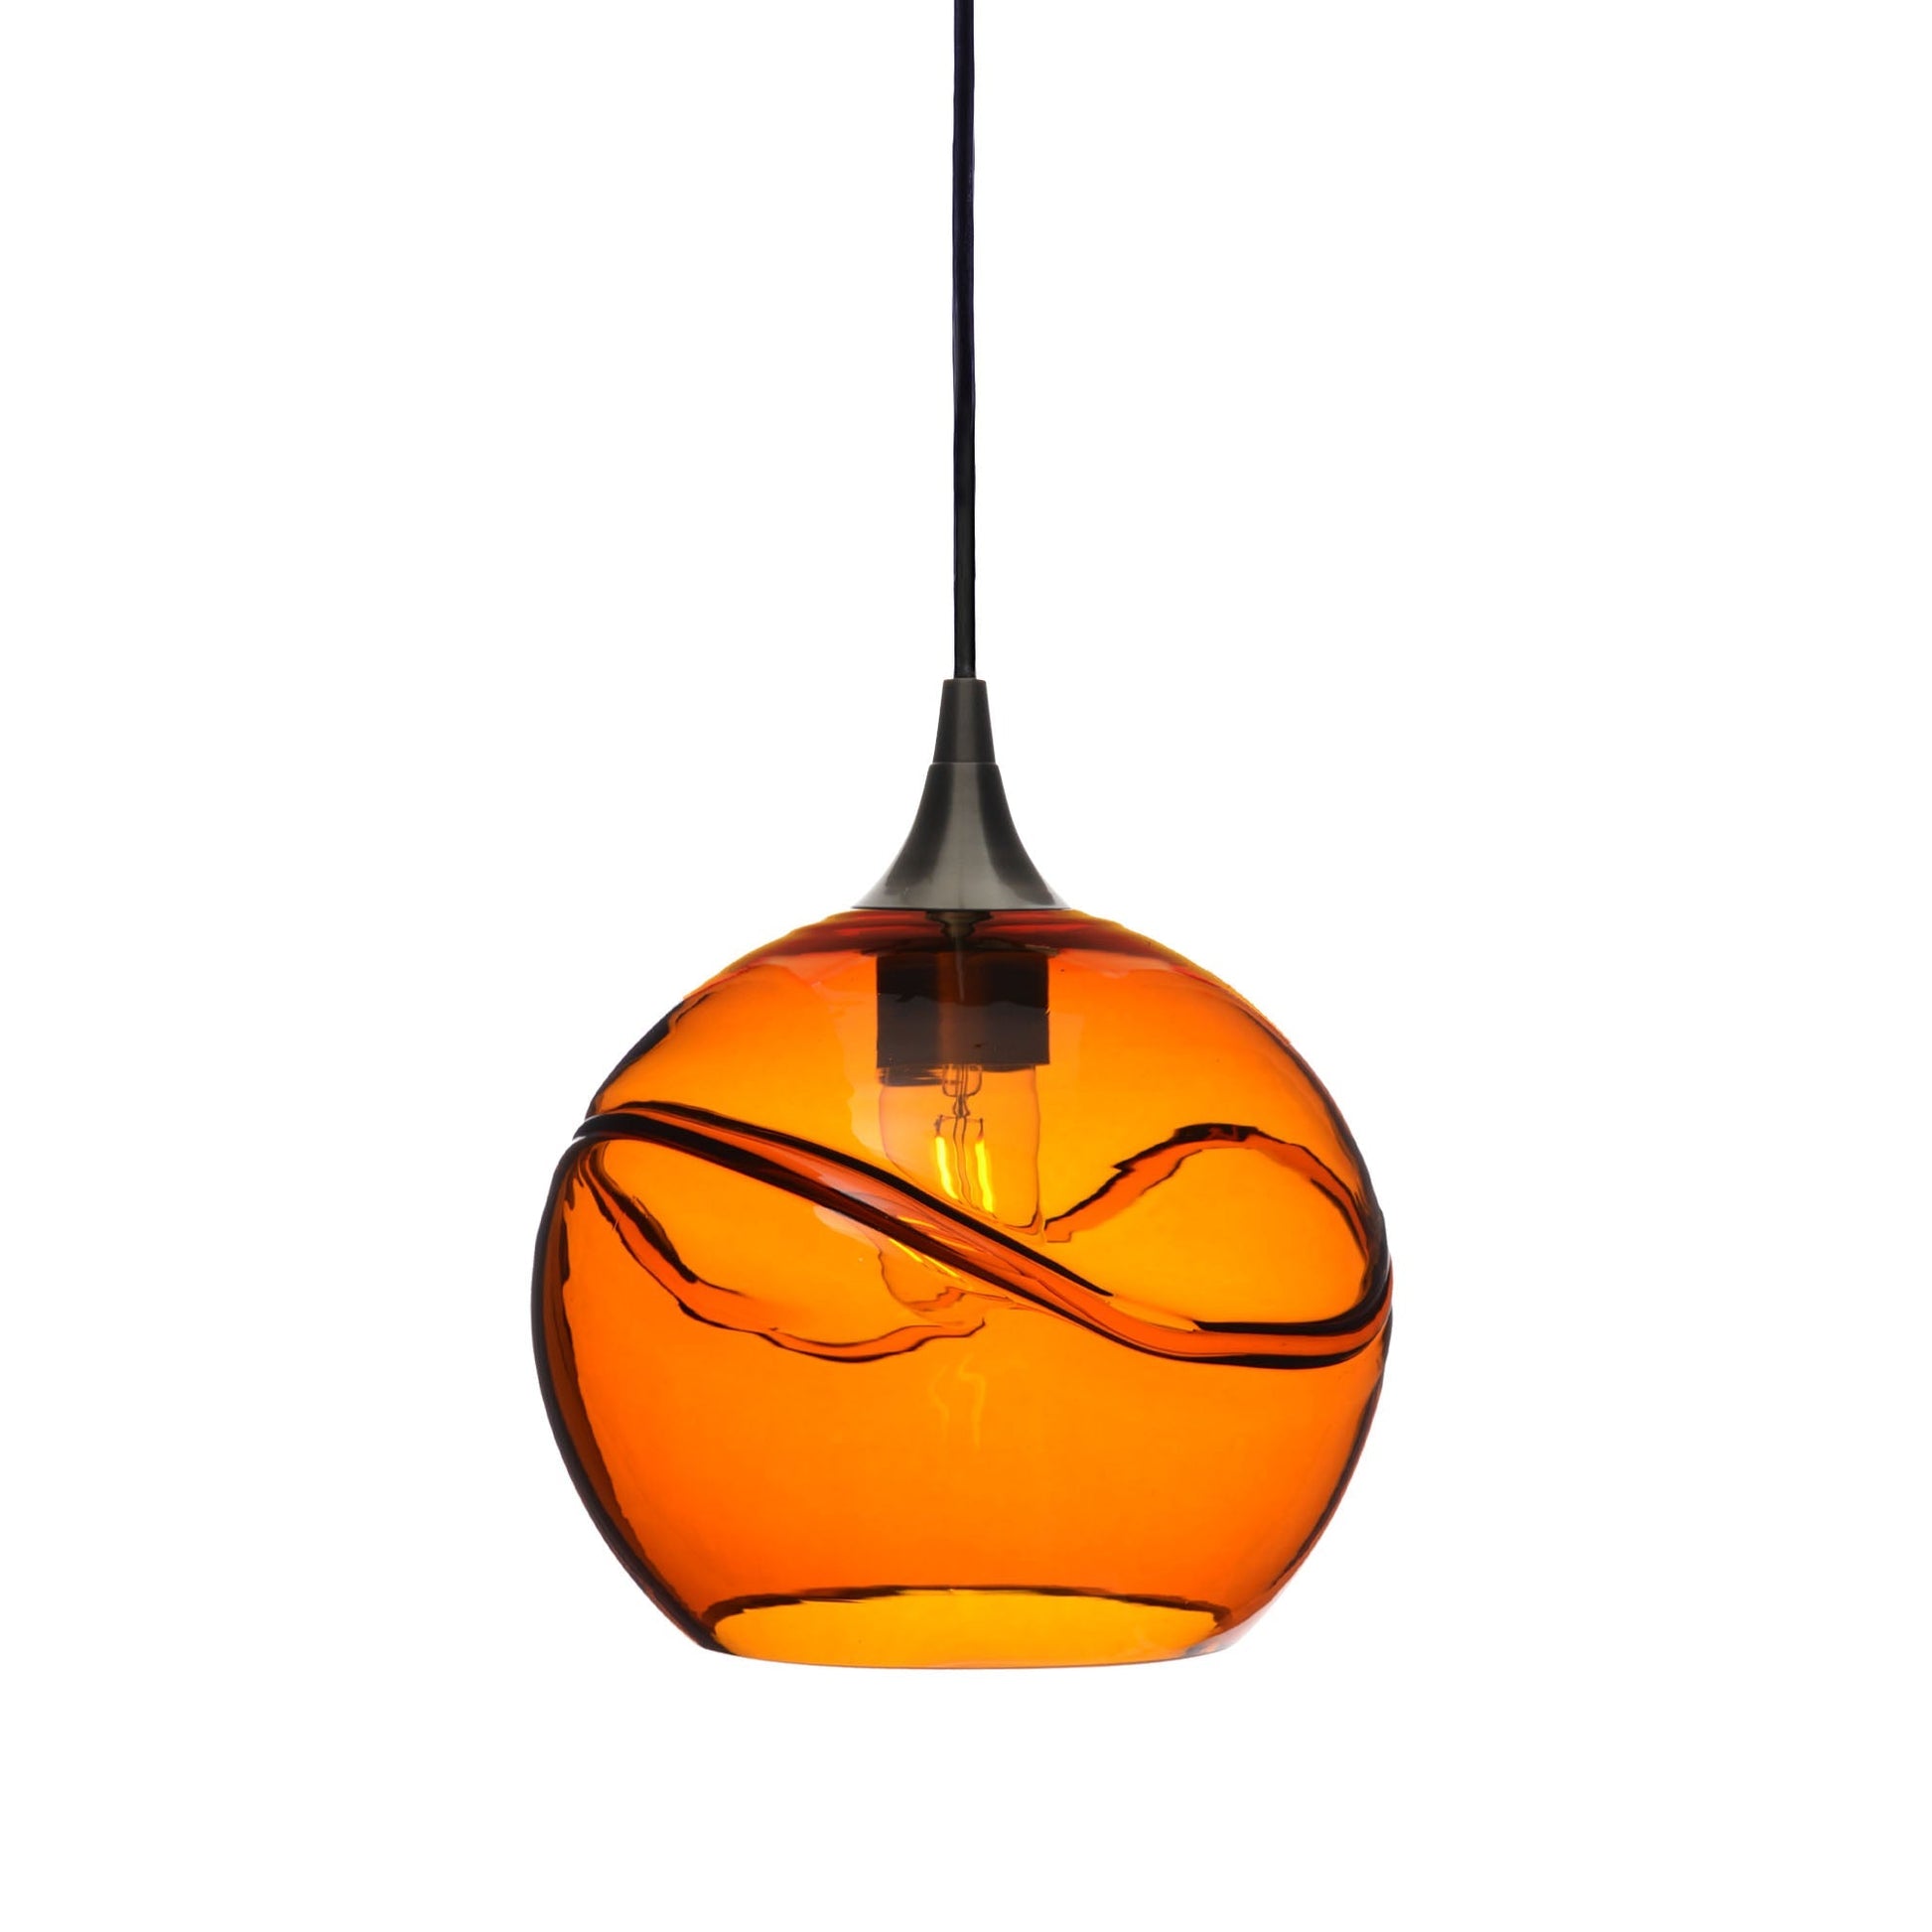 768 Swell: Single Pendant Light-Glass-Bicycle Glass Co - Hotshop-Harvest Gold-Antique Bronze-Bicycle Glass Co